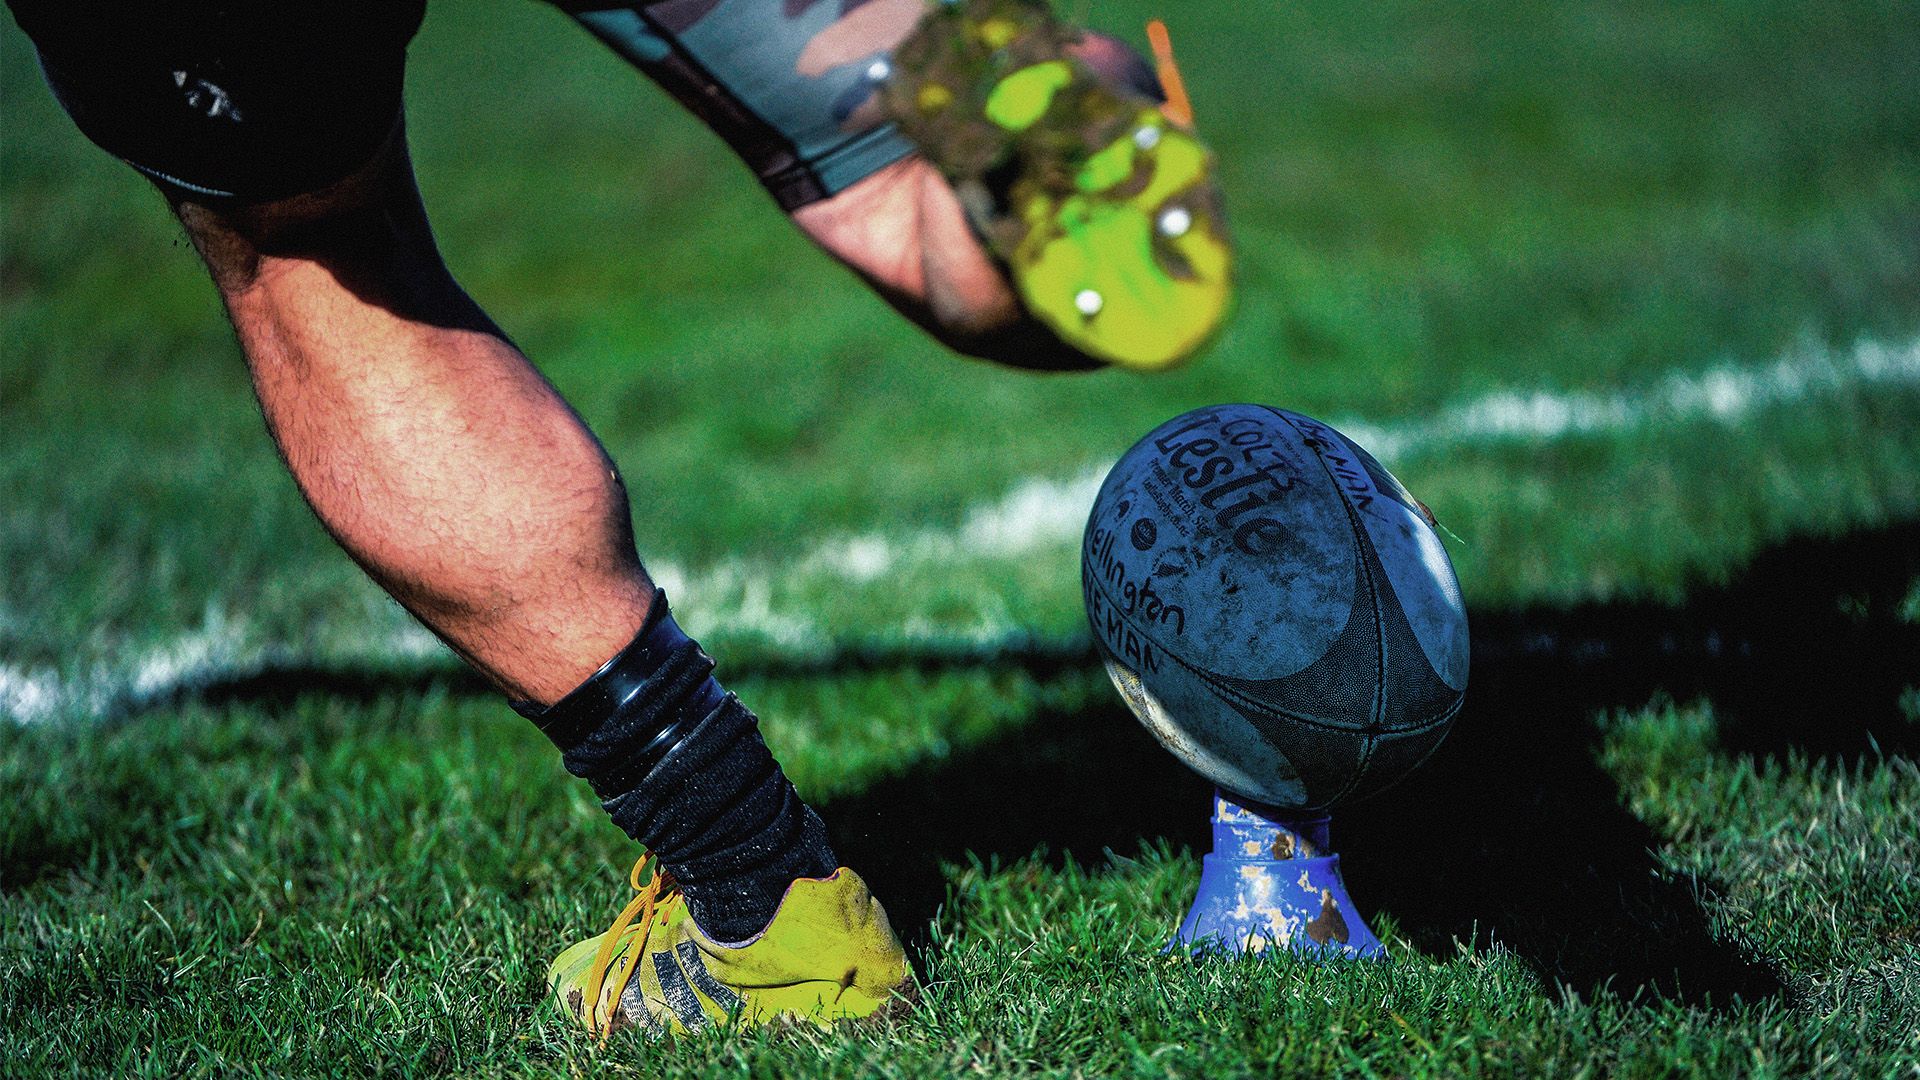 Mans foot kicking positioned to kick a rugby ball on a field.